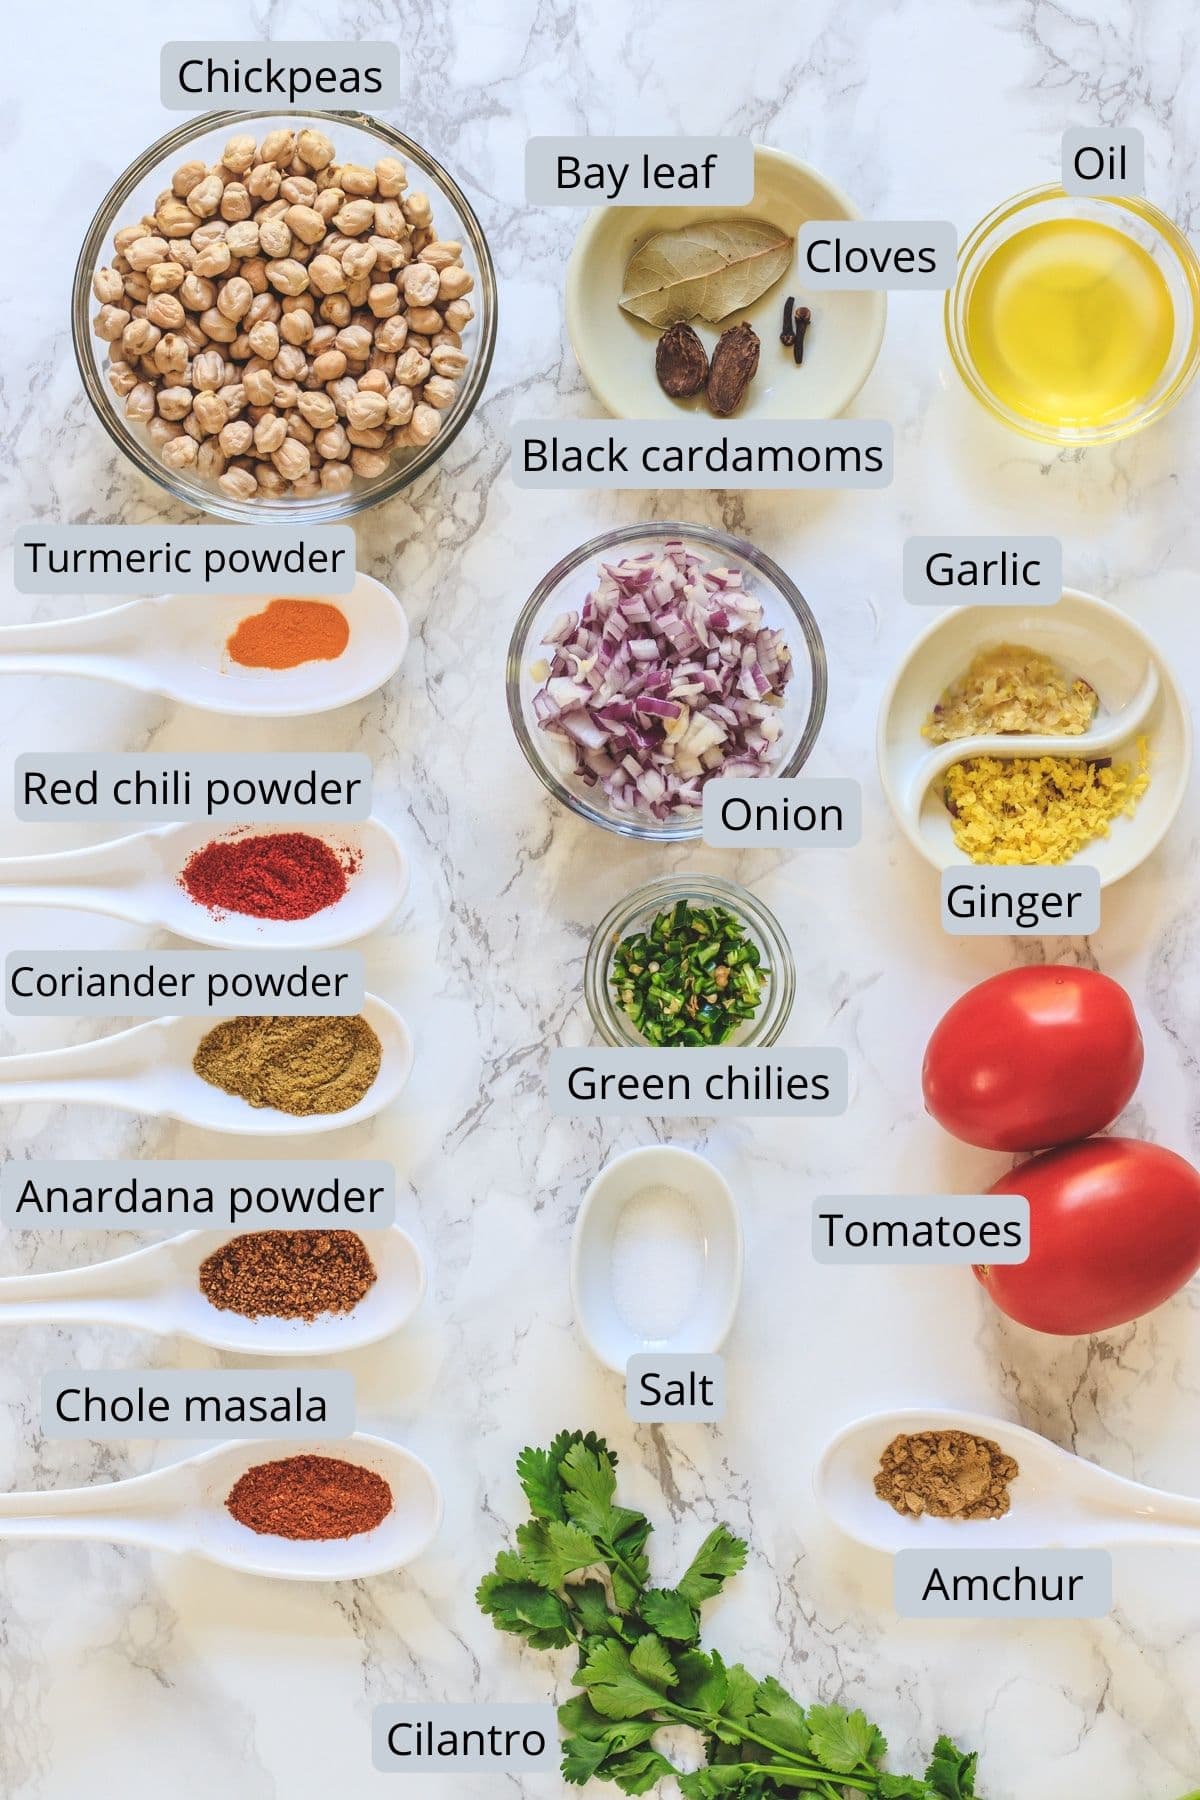 ingredients used in chana masala includes chickpeas, oil, onion, tomato, ginger, garlic, green chili, spices, salt and cilantro.